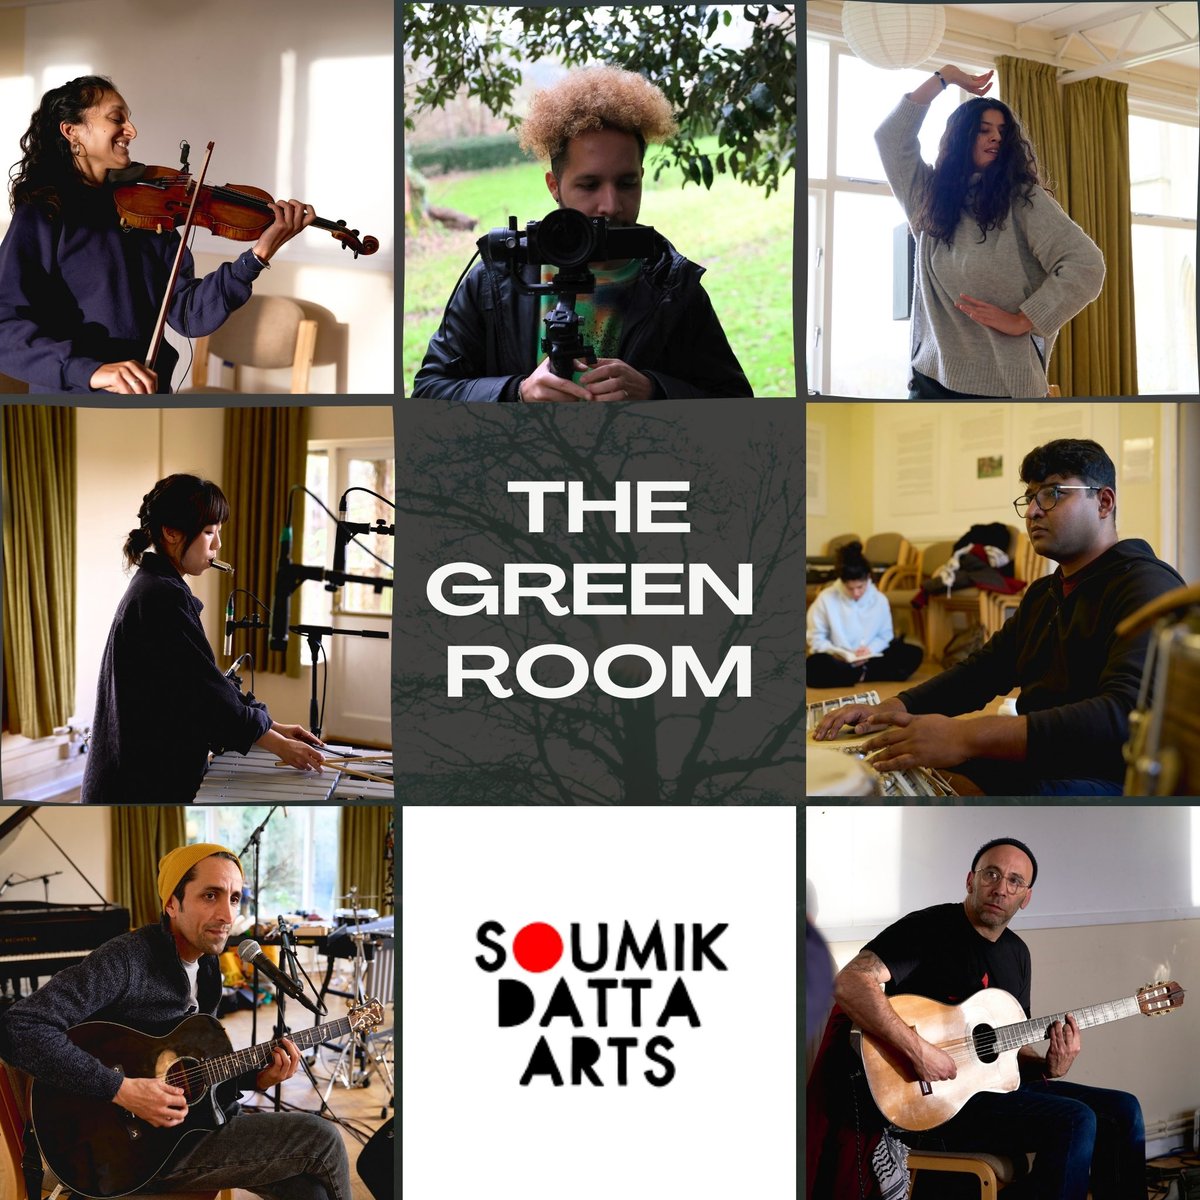 THE GREEN ROOM FESTIVAL @RichMixLondon 10th Feb 📽️🥁🎹💃🏽🎻 🪩 🎸 7 artists from migrant and refugee backgrounds weave music, dance, and film to address themes of home, displacement and migration. A celebration of diversity and a dialogue of difference. richmix.org.uk/events/the-gre…